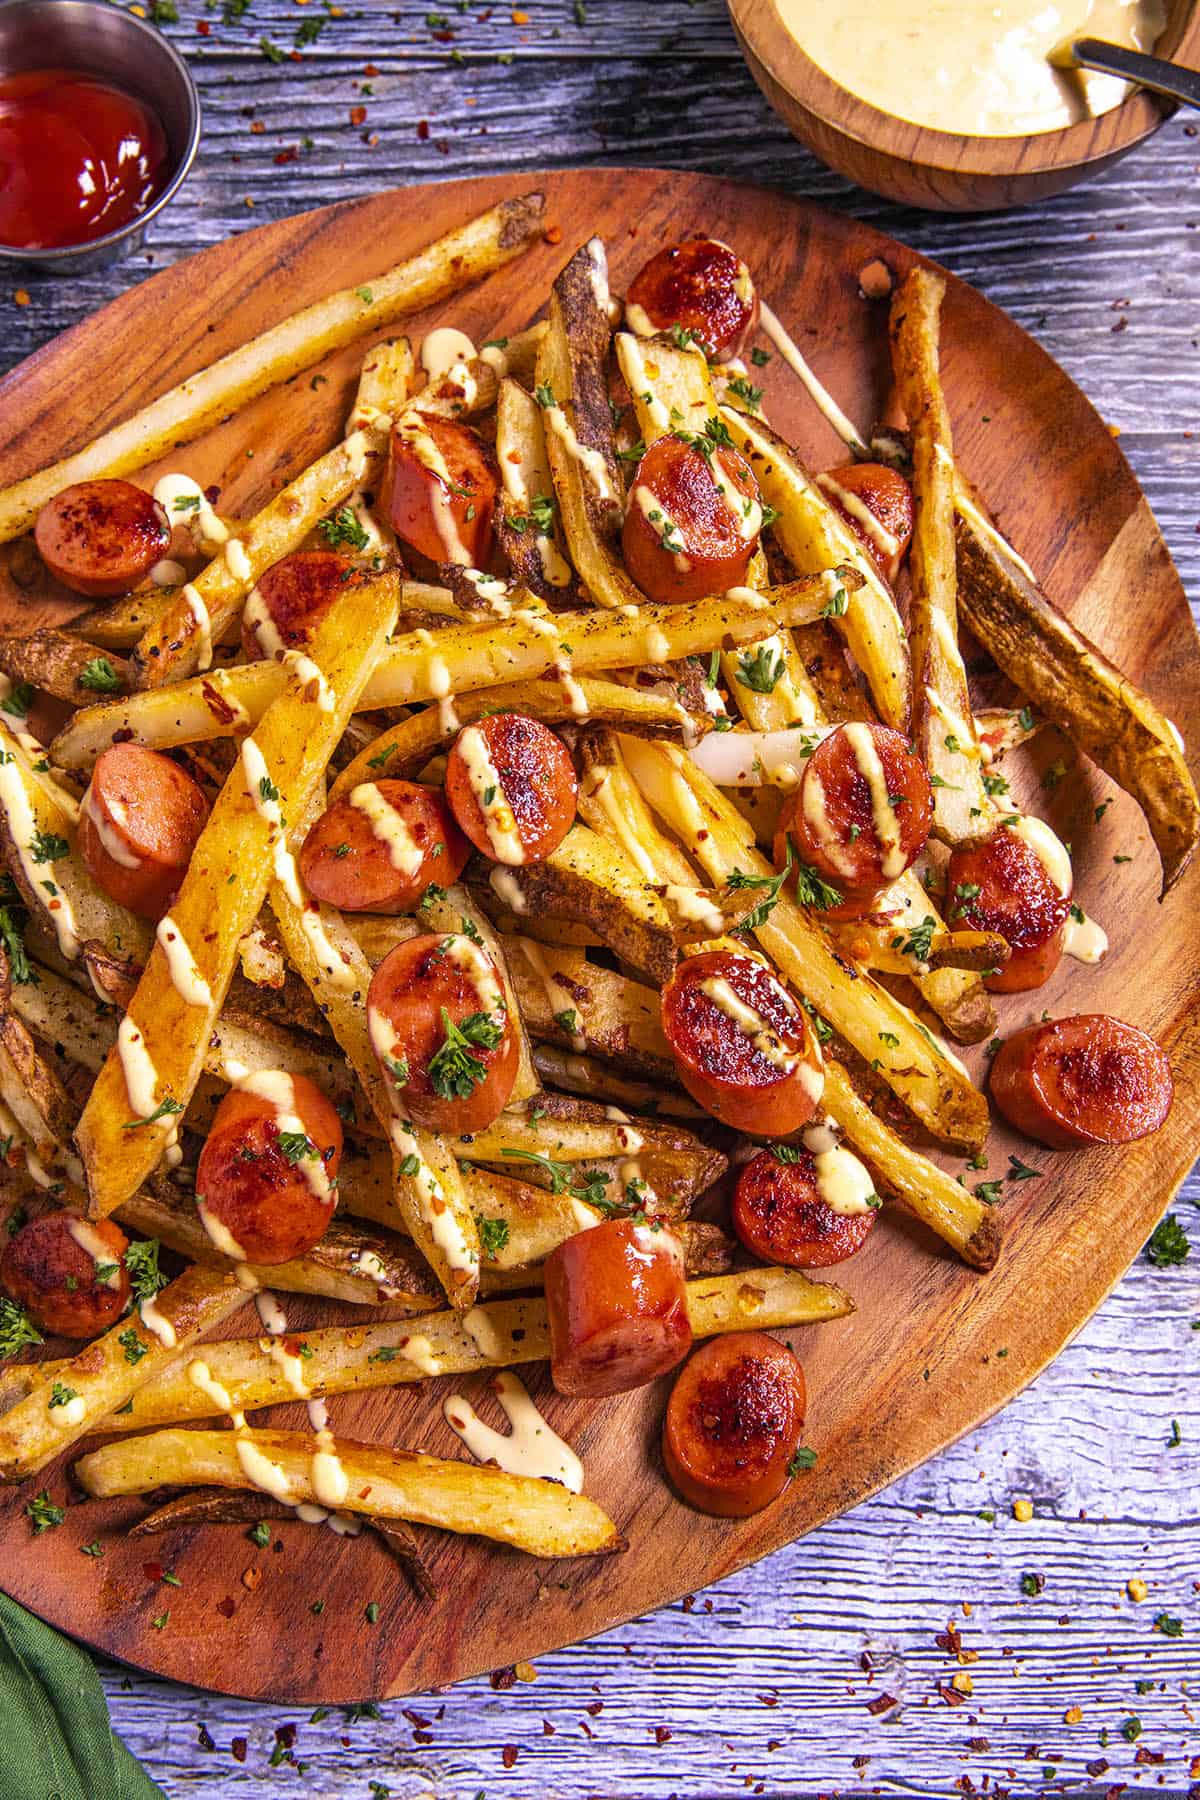 Salchipapas on a platter, ready to serve, with sauces on the side